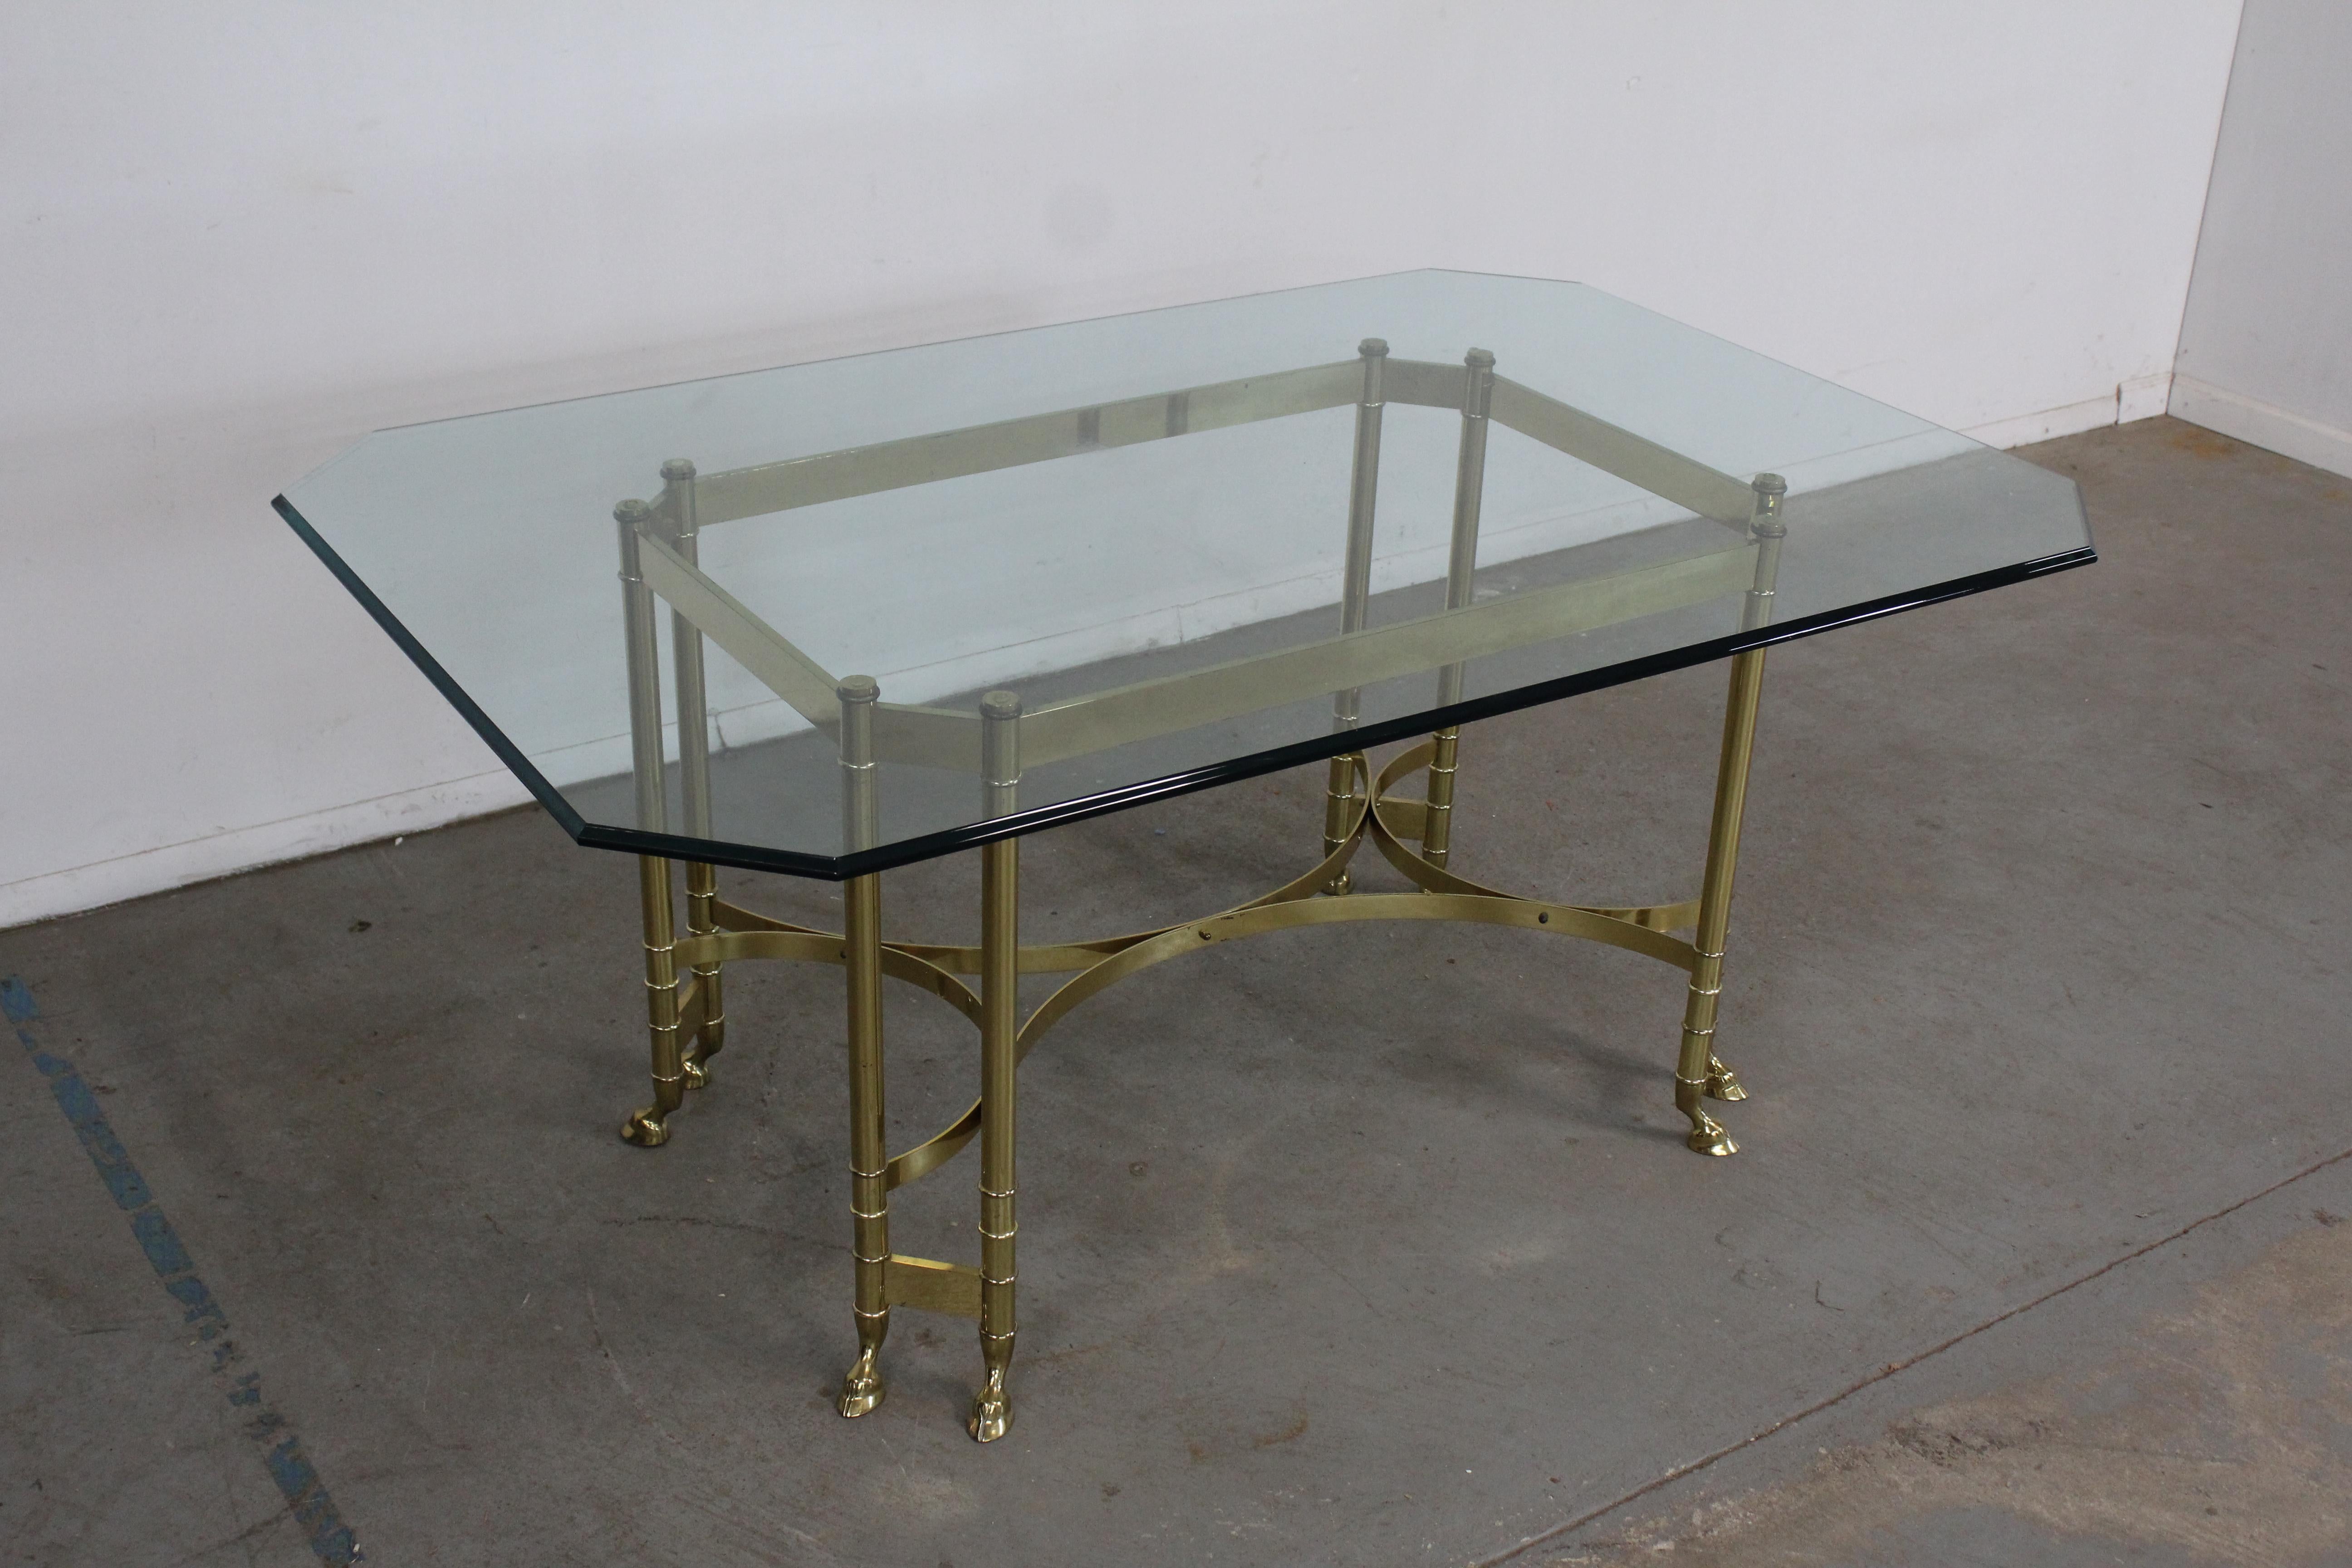 Vintage brass and glass Jansen style hoof foot dining table
Offered is a beautiful vintage brass and glass Jansen style hoof foot dining table. It is made of heavy brass. Features a 1